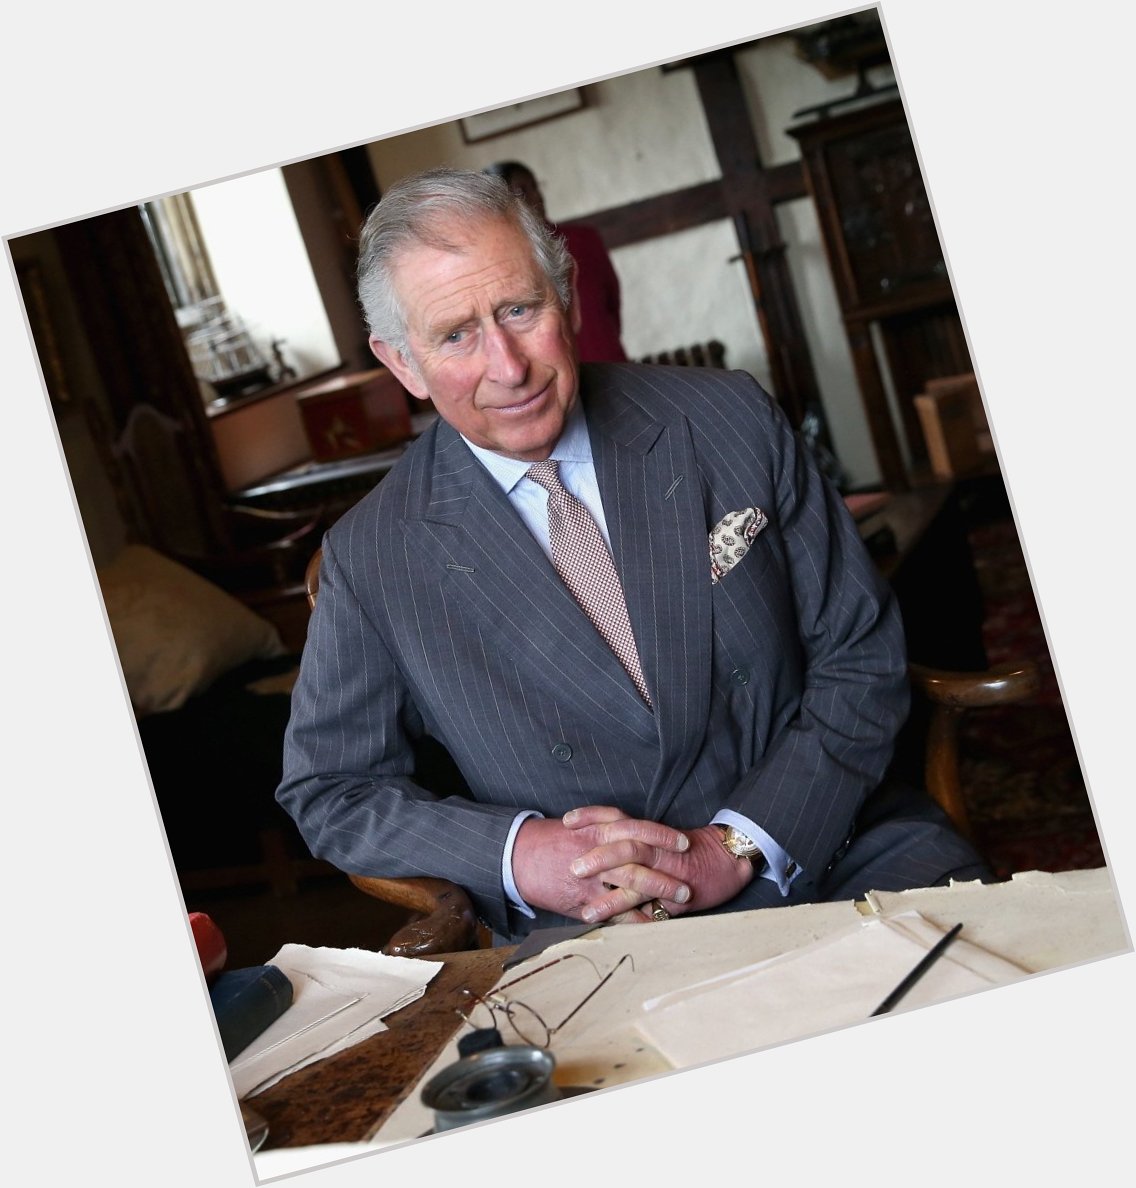 Happy 67th birthday to Prince Charles! The Prince of Wales is the oldest heir to the throne in British history. 